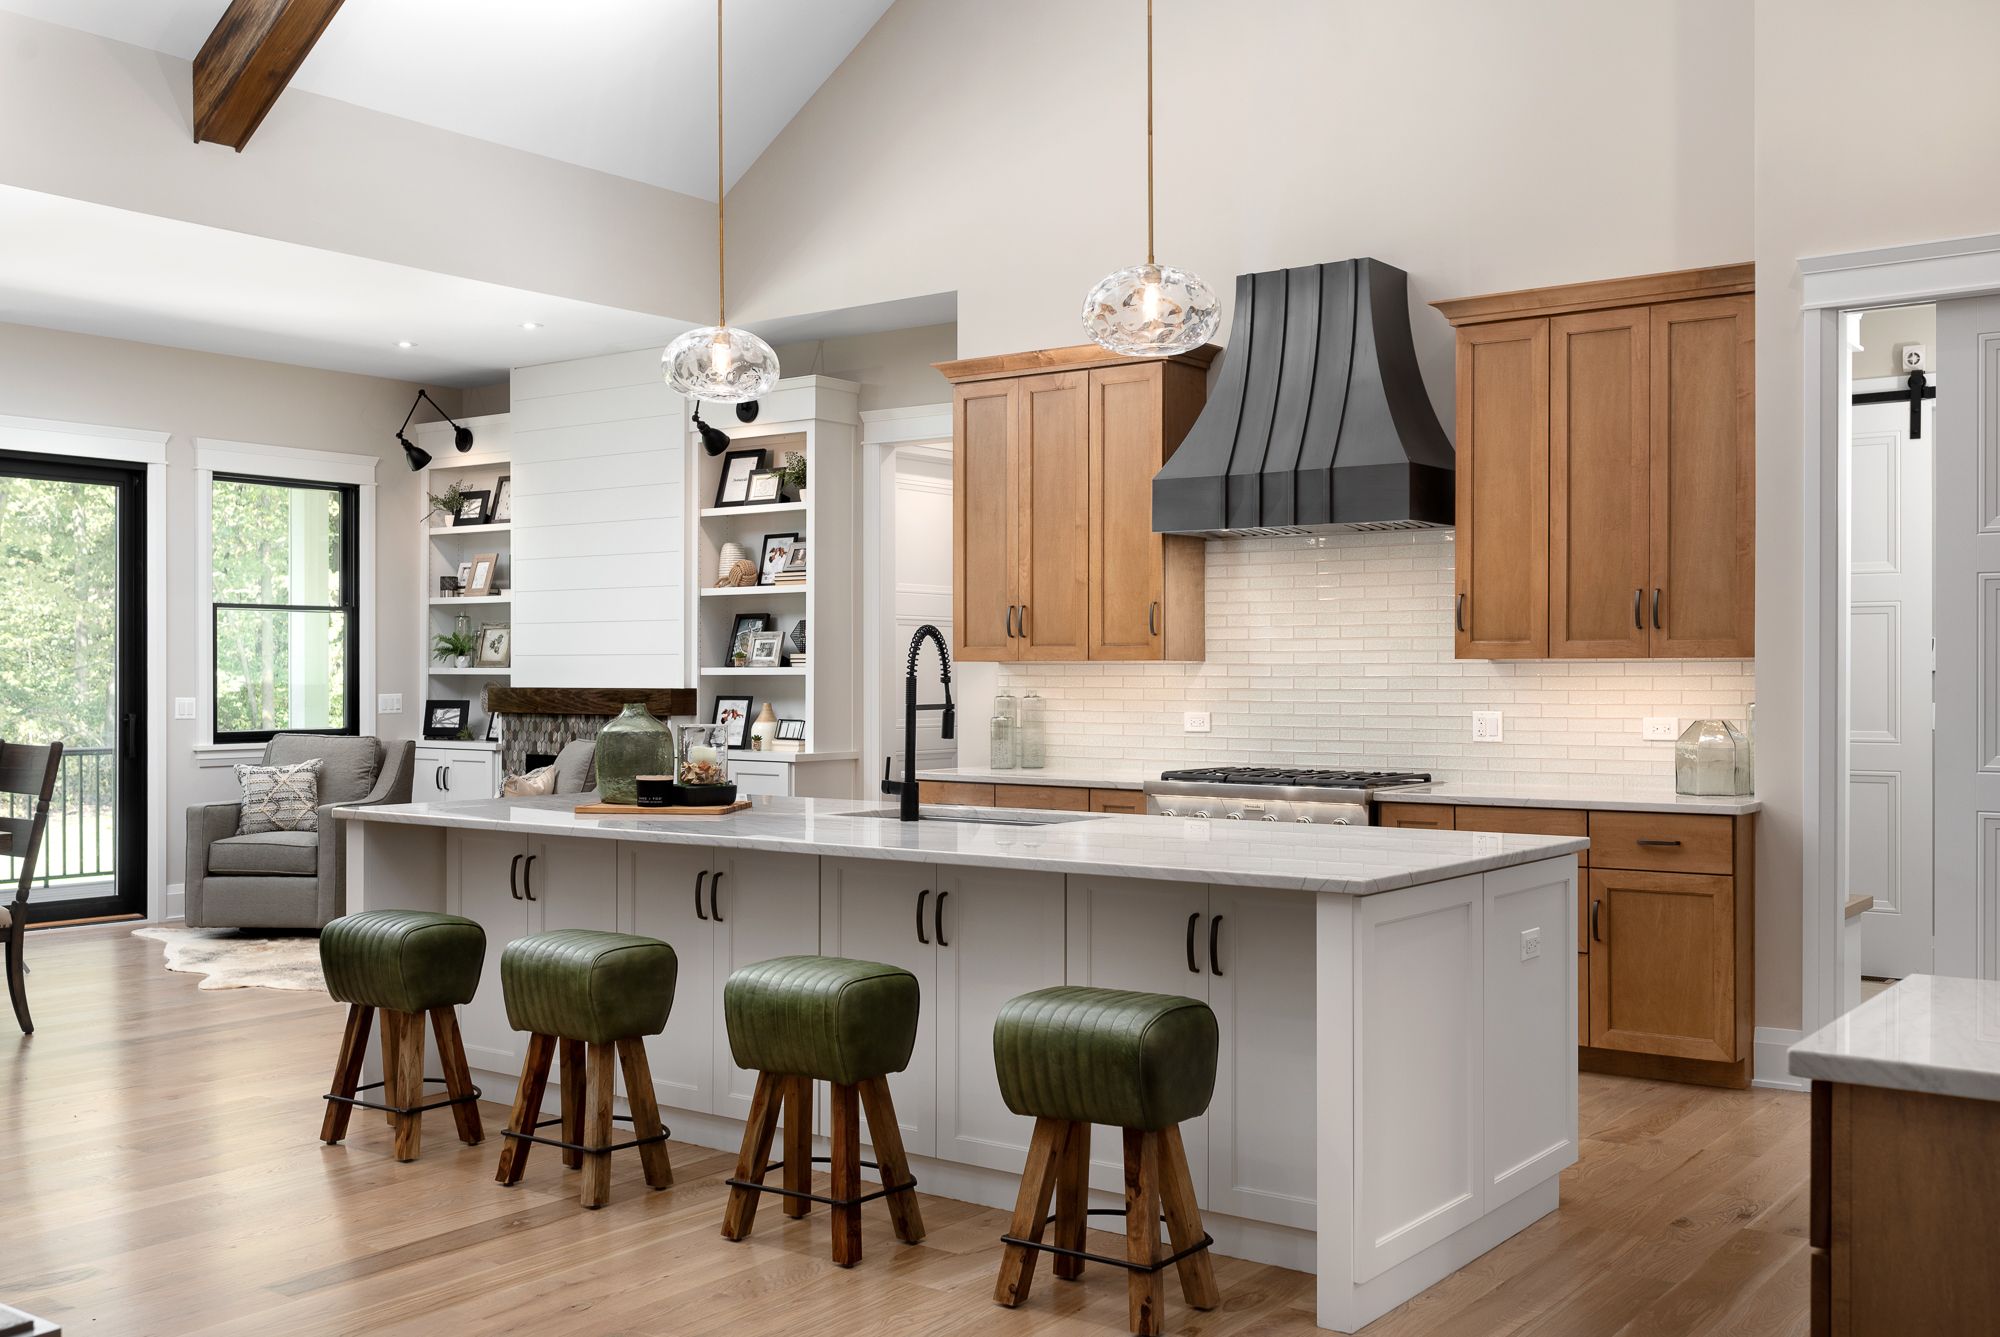 Open kitchen with white island, wood cabinets and green barstools